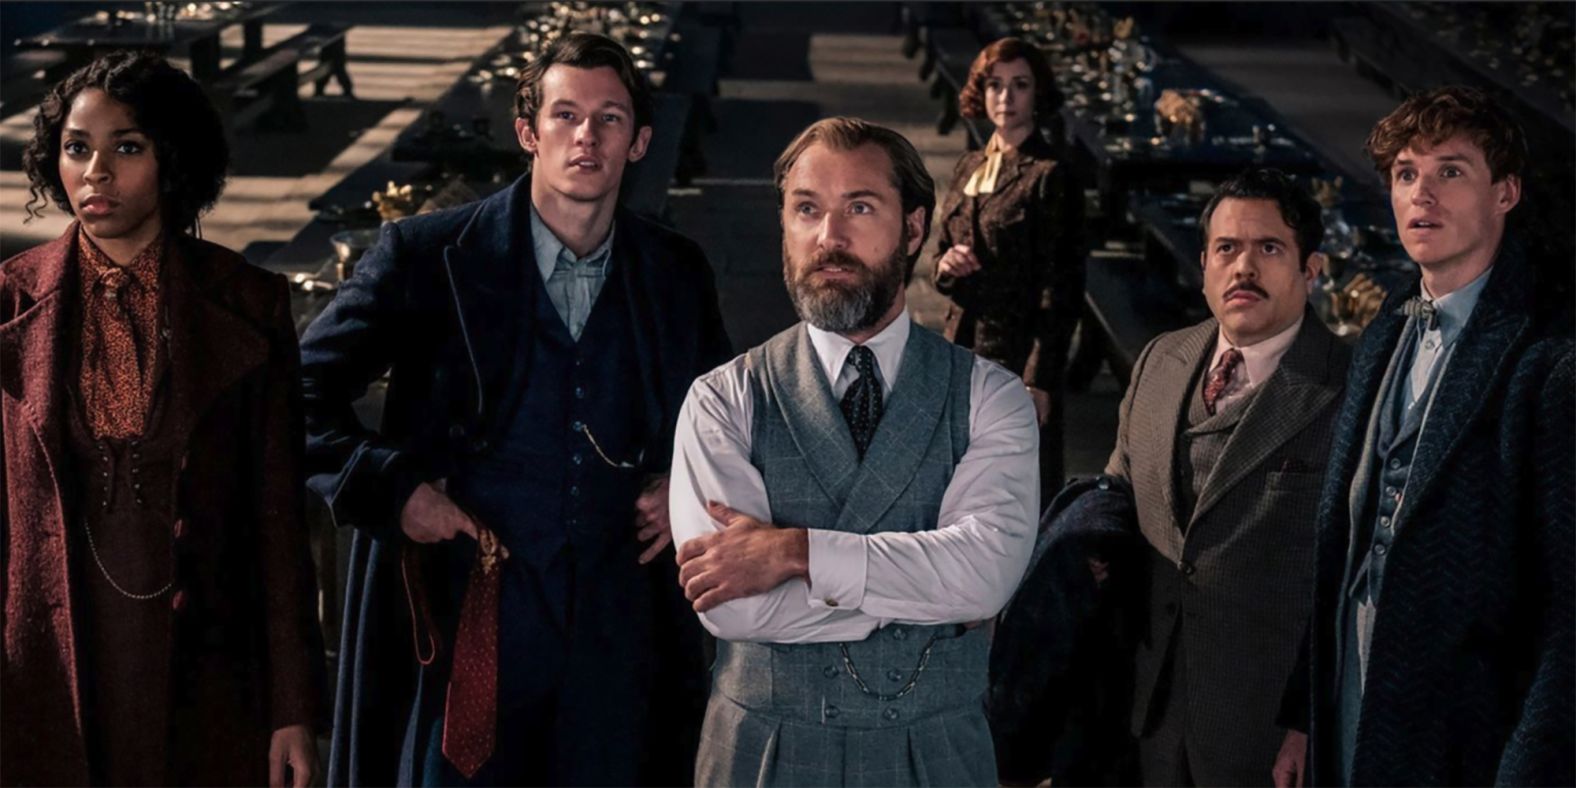 <strong>"Fantastic Beasts: The Secrets of Dumbledore"</strong>: Follow the unique story of the powerful wizard and Hogwarts headmaster Albus Dumbledore in this film that is part of the "Harry Potter" canon. <strong>(HBO Max) </strong>